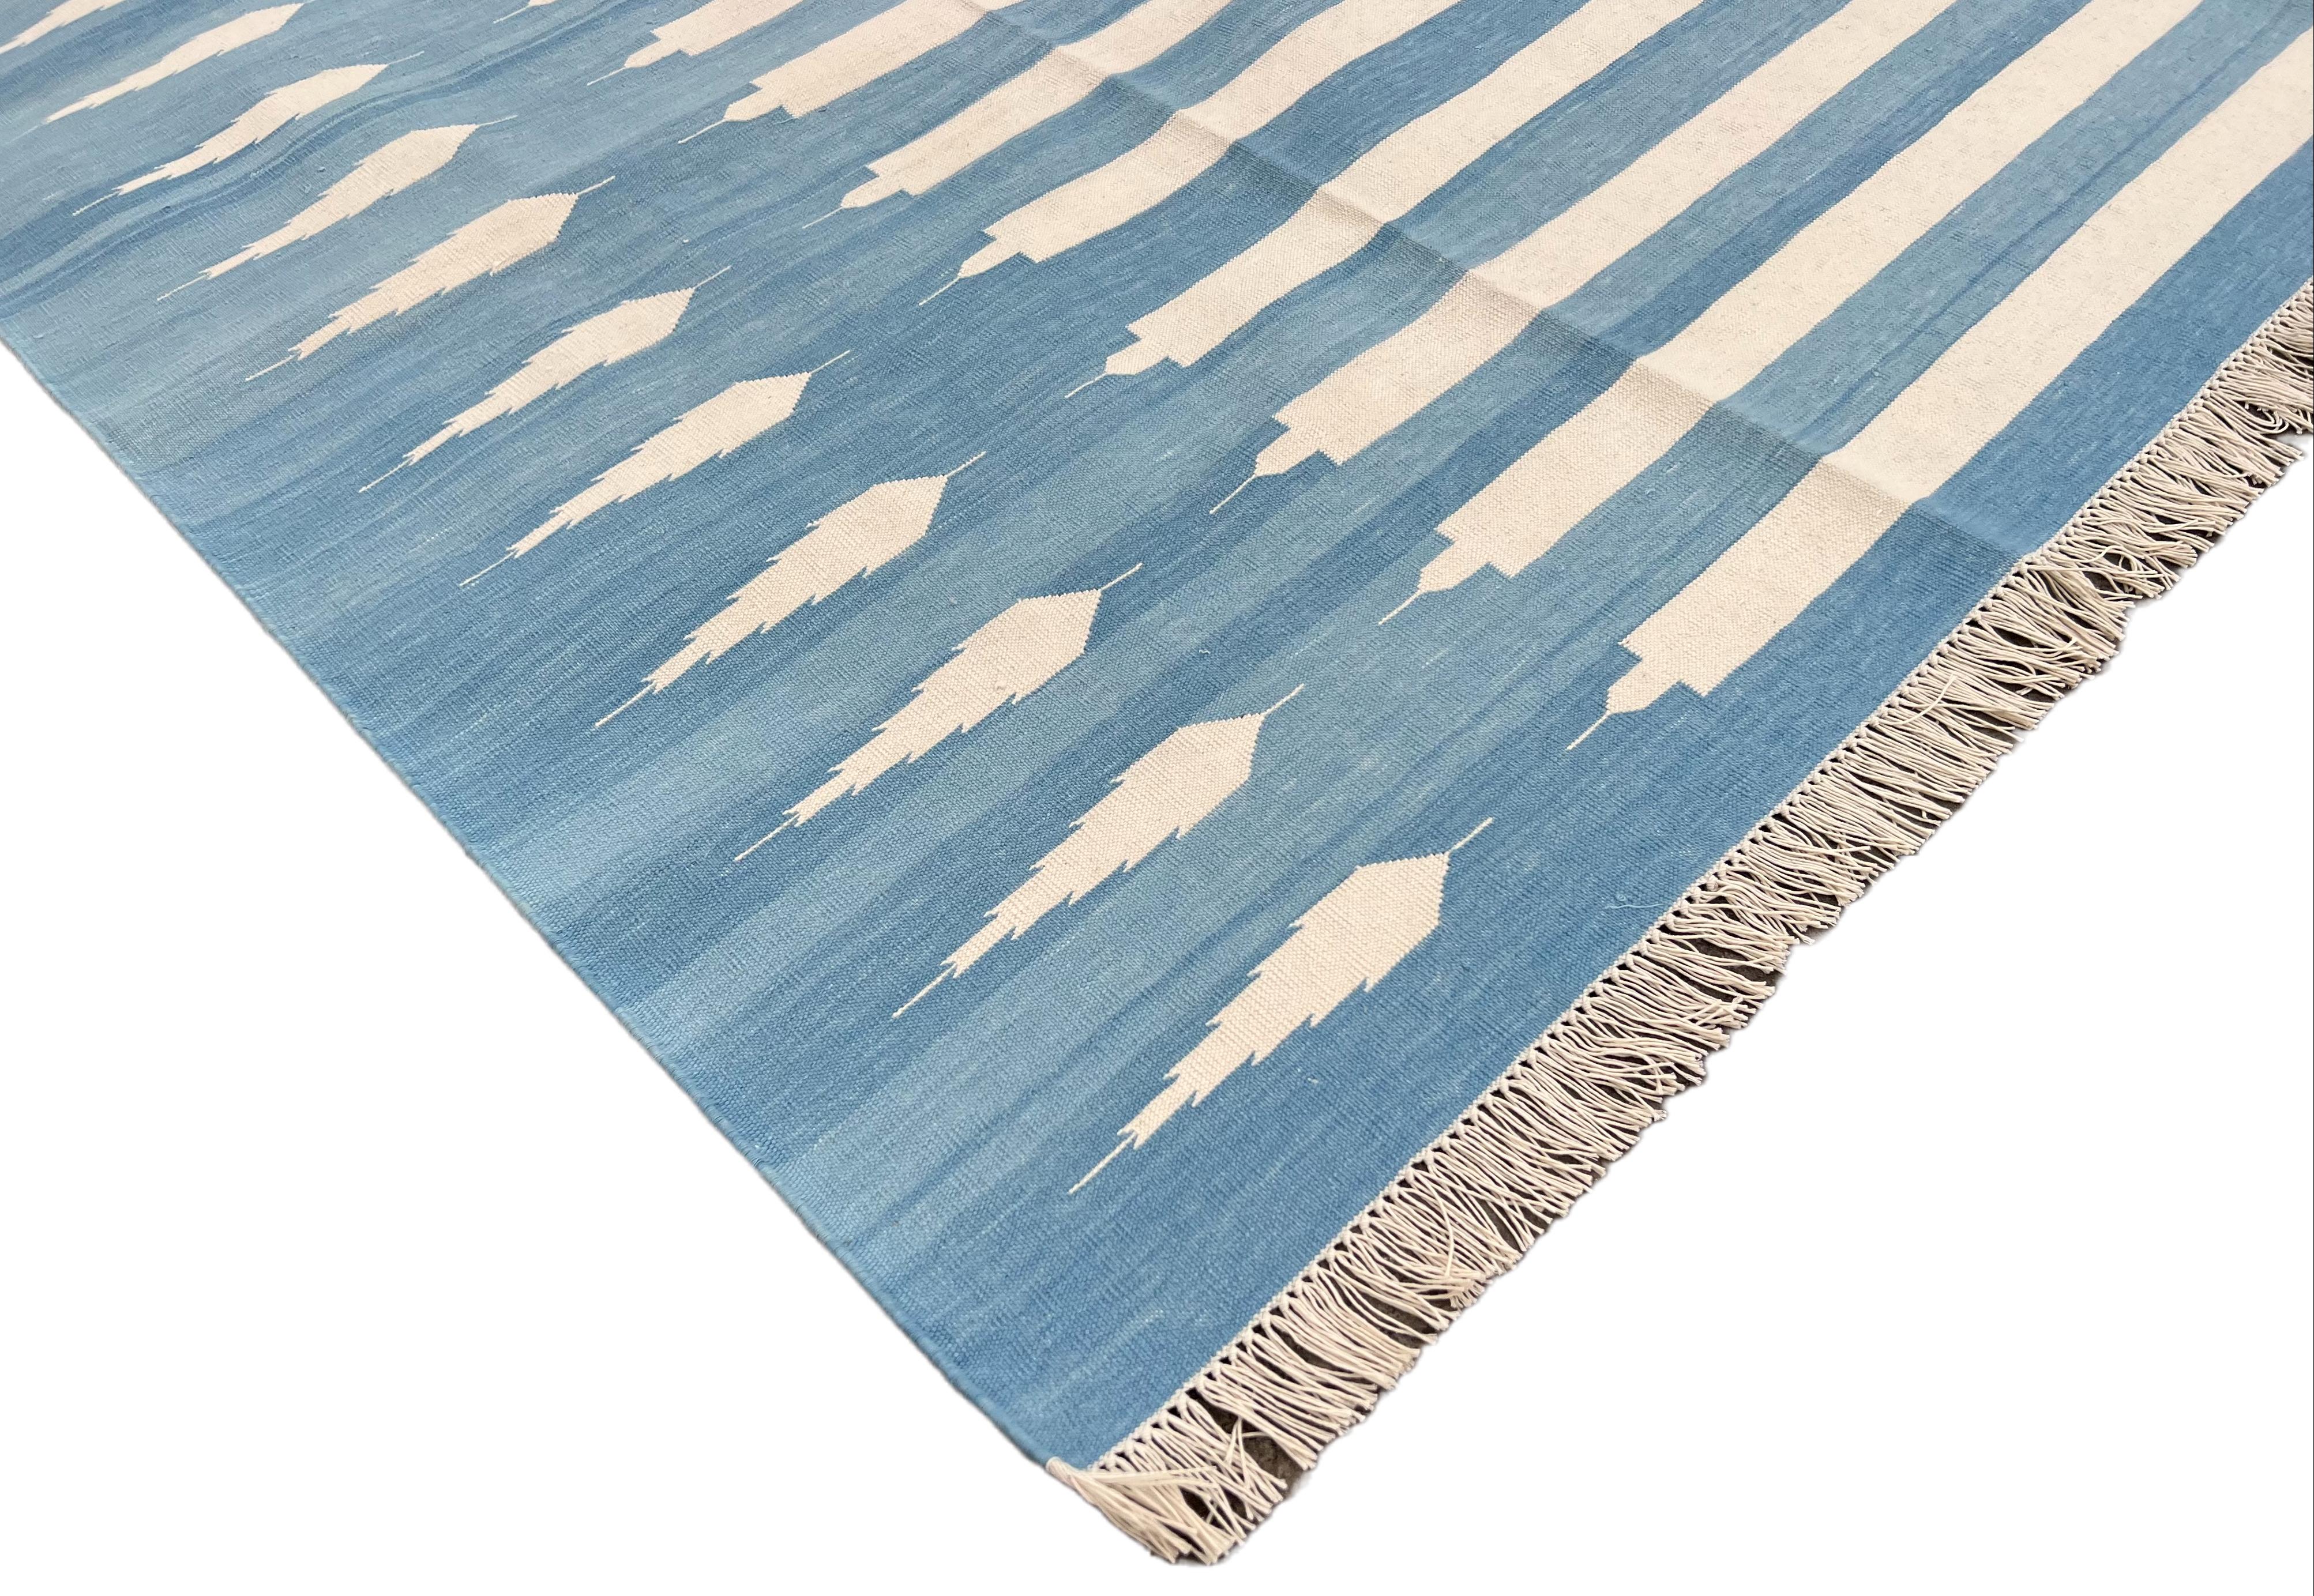 Mid-Century Modern Handmade Cotton Area Flat Weave Rug, Blue And White Striped Indian Dhurrie Rug For Sale